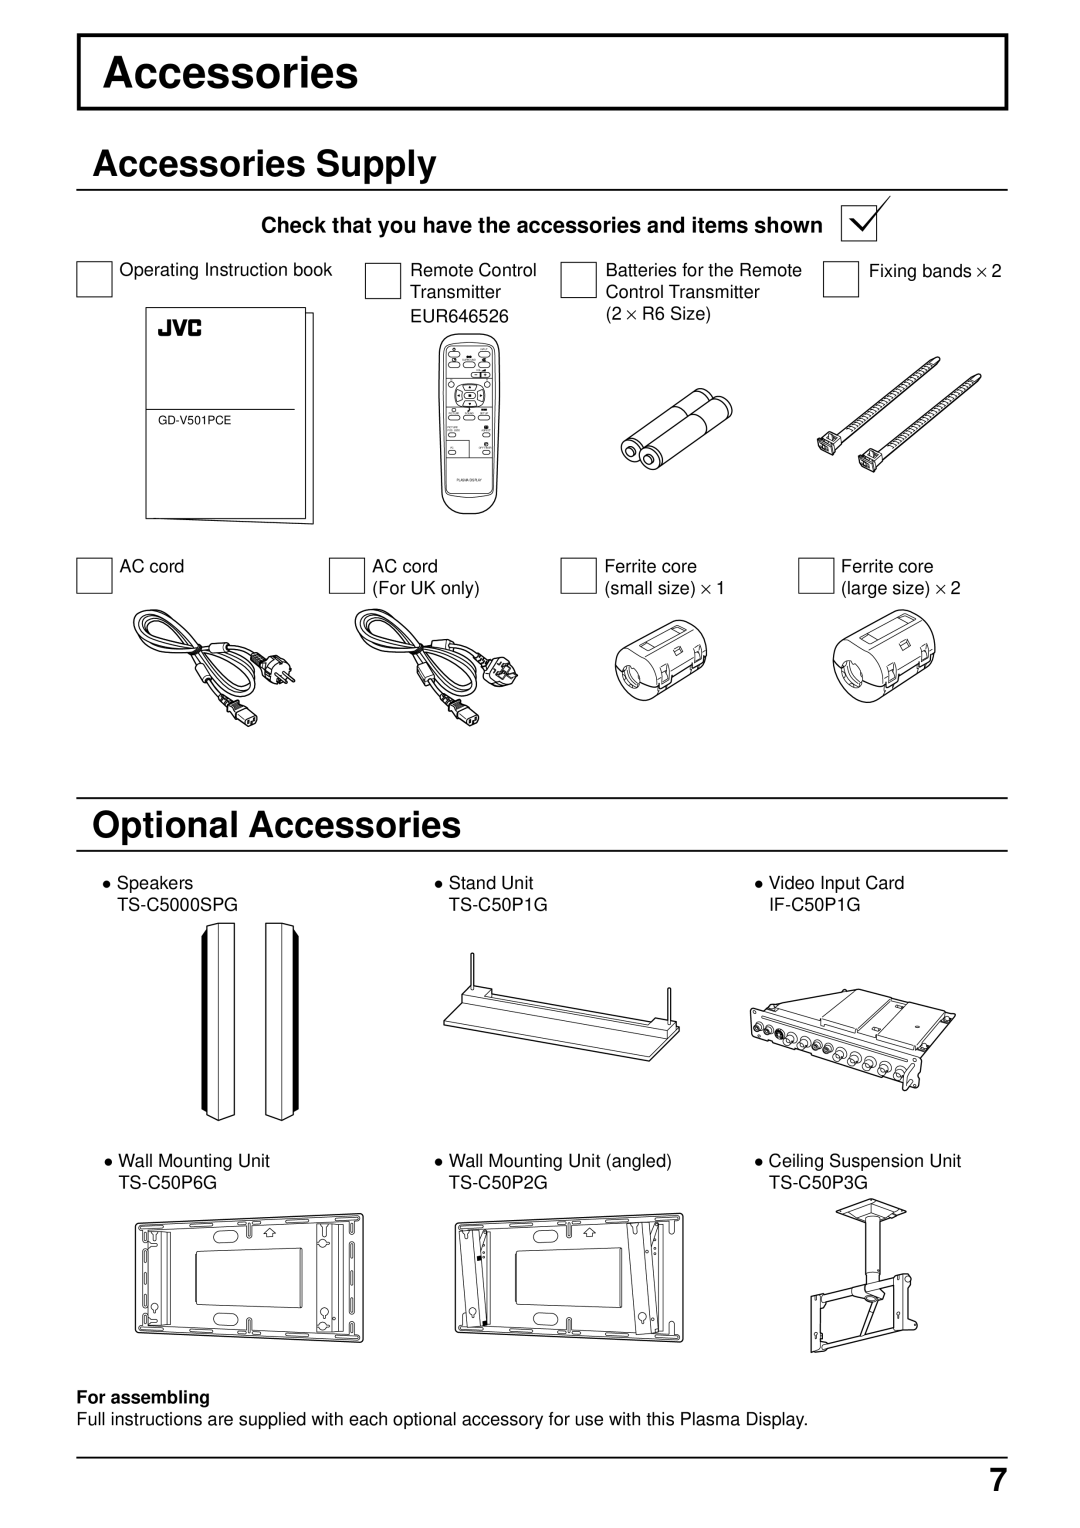 JVC GD-V501PCE manual Accessories Supply, Optional Accessories, Check that you have the accessories and items shown 